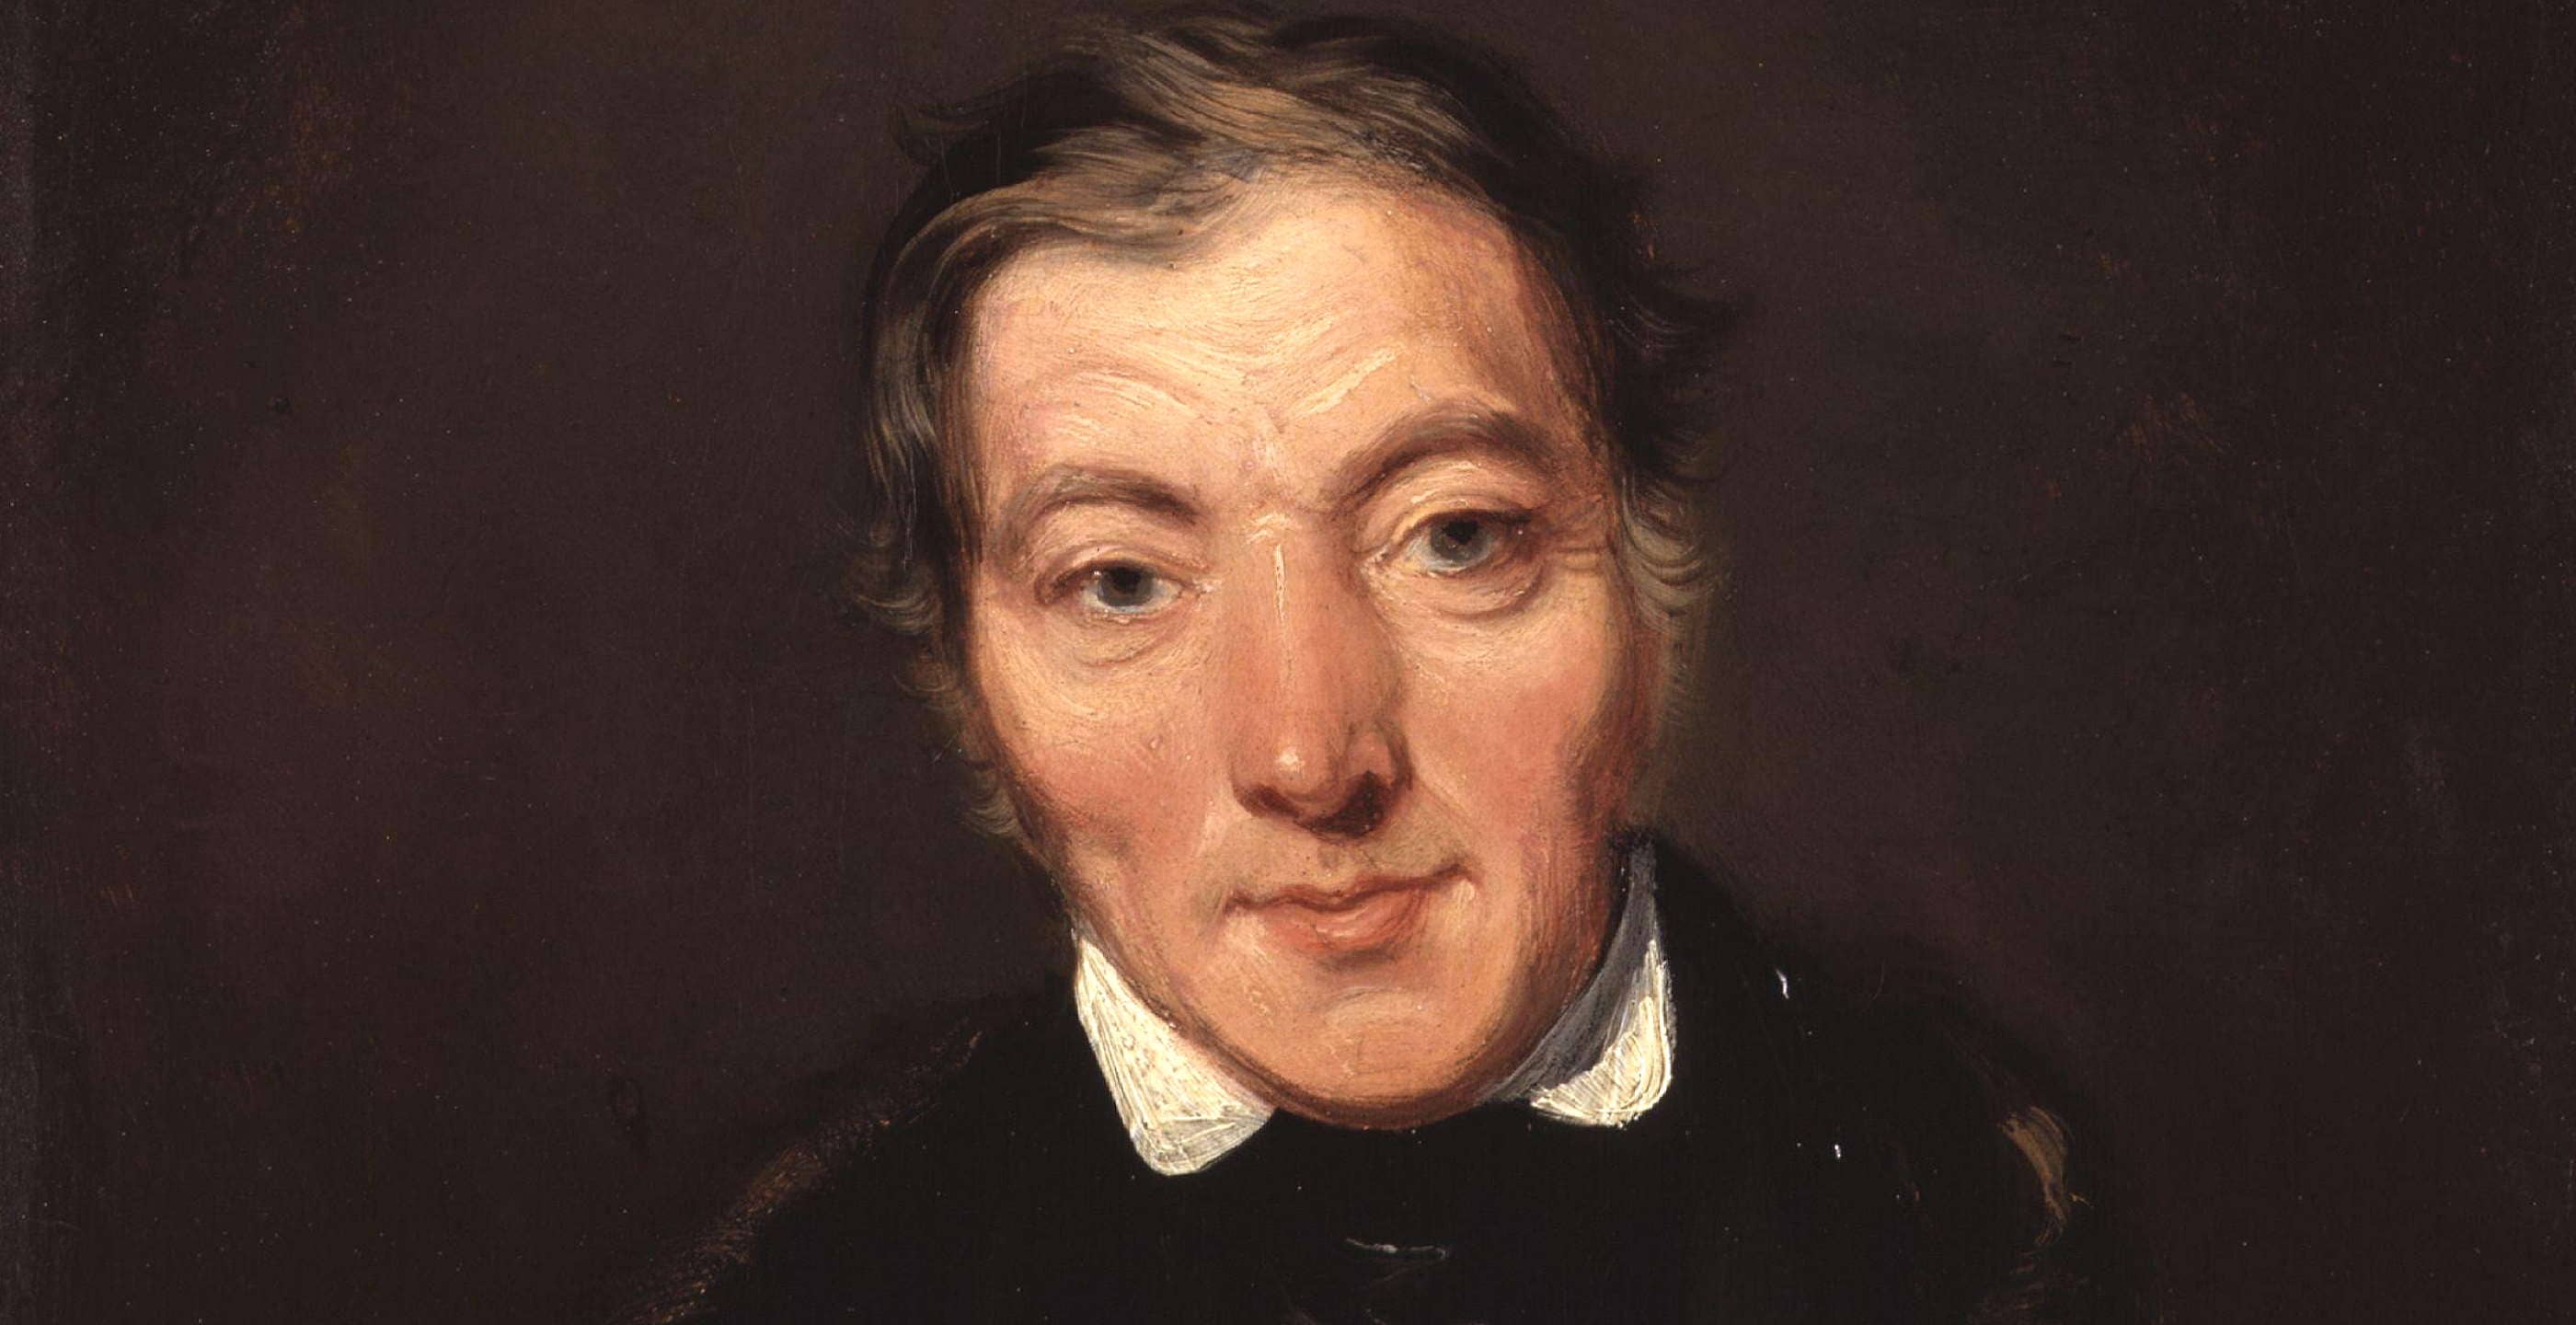 Falling in love with a miller's daughter changed the course of his life: Who is Robert Owen?